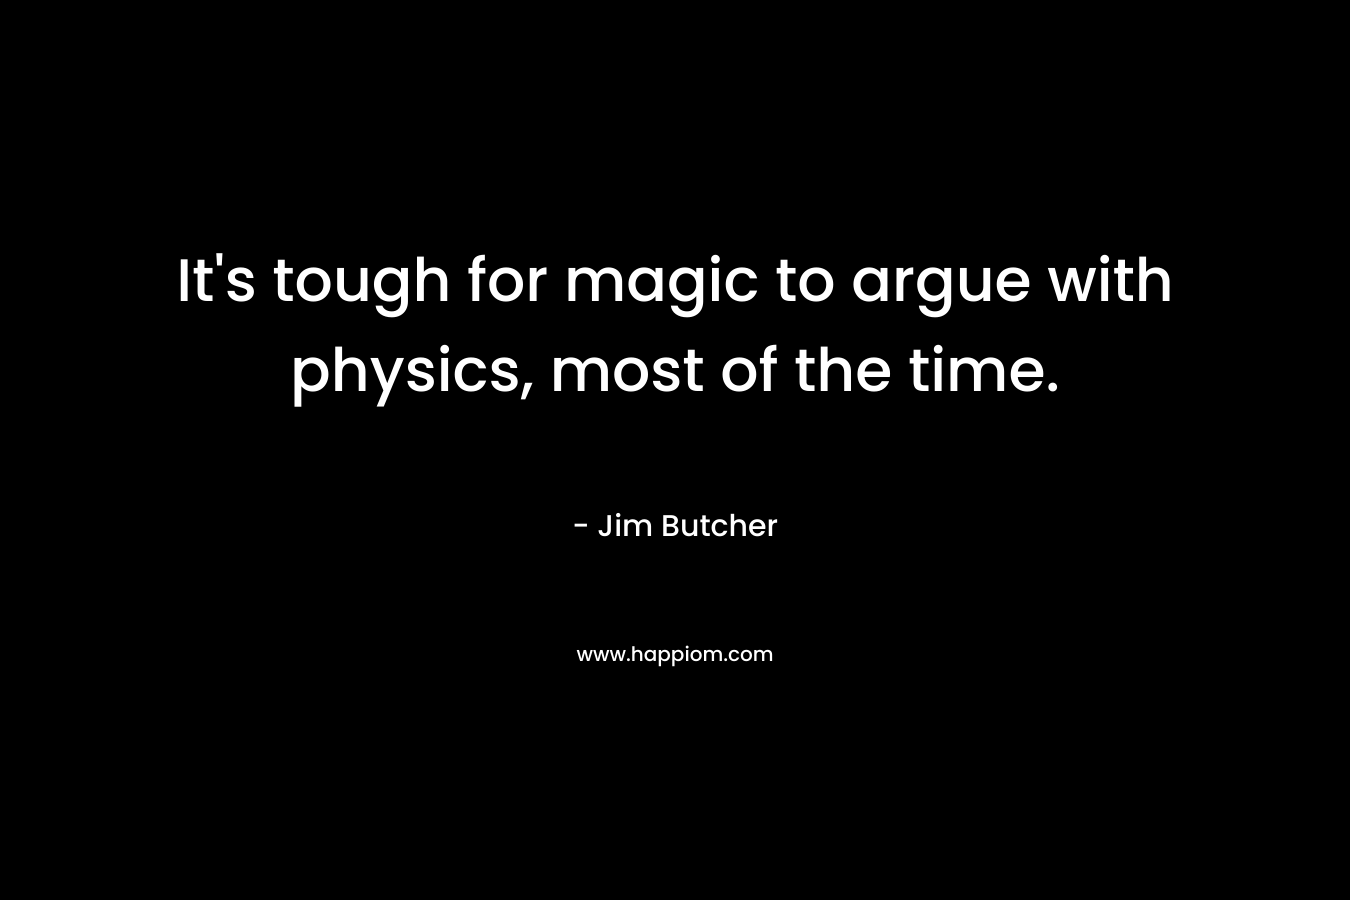 It's tough for magic to argue with physics, most of the time.